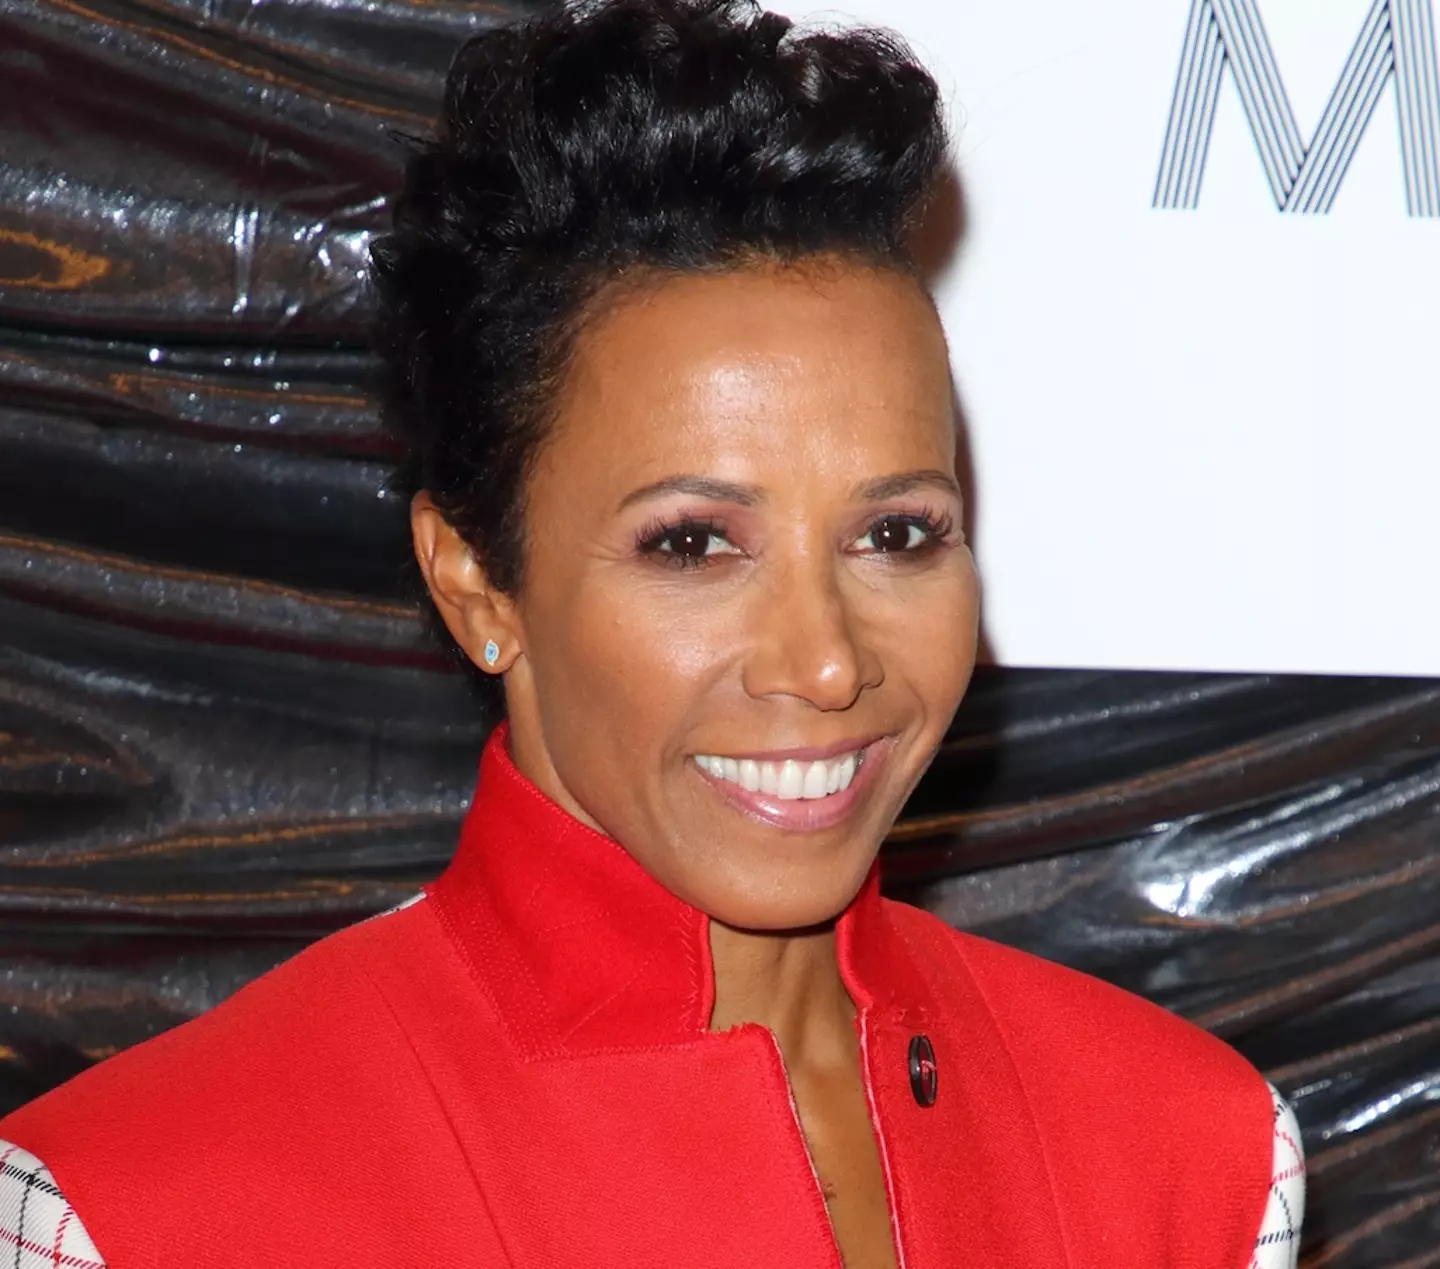 Dame Kelly Holmes joined the Army before becoming an Olympian.